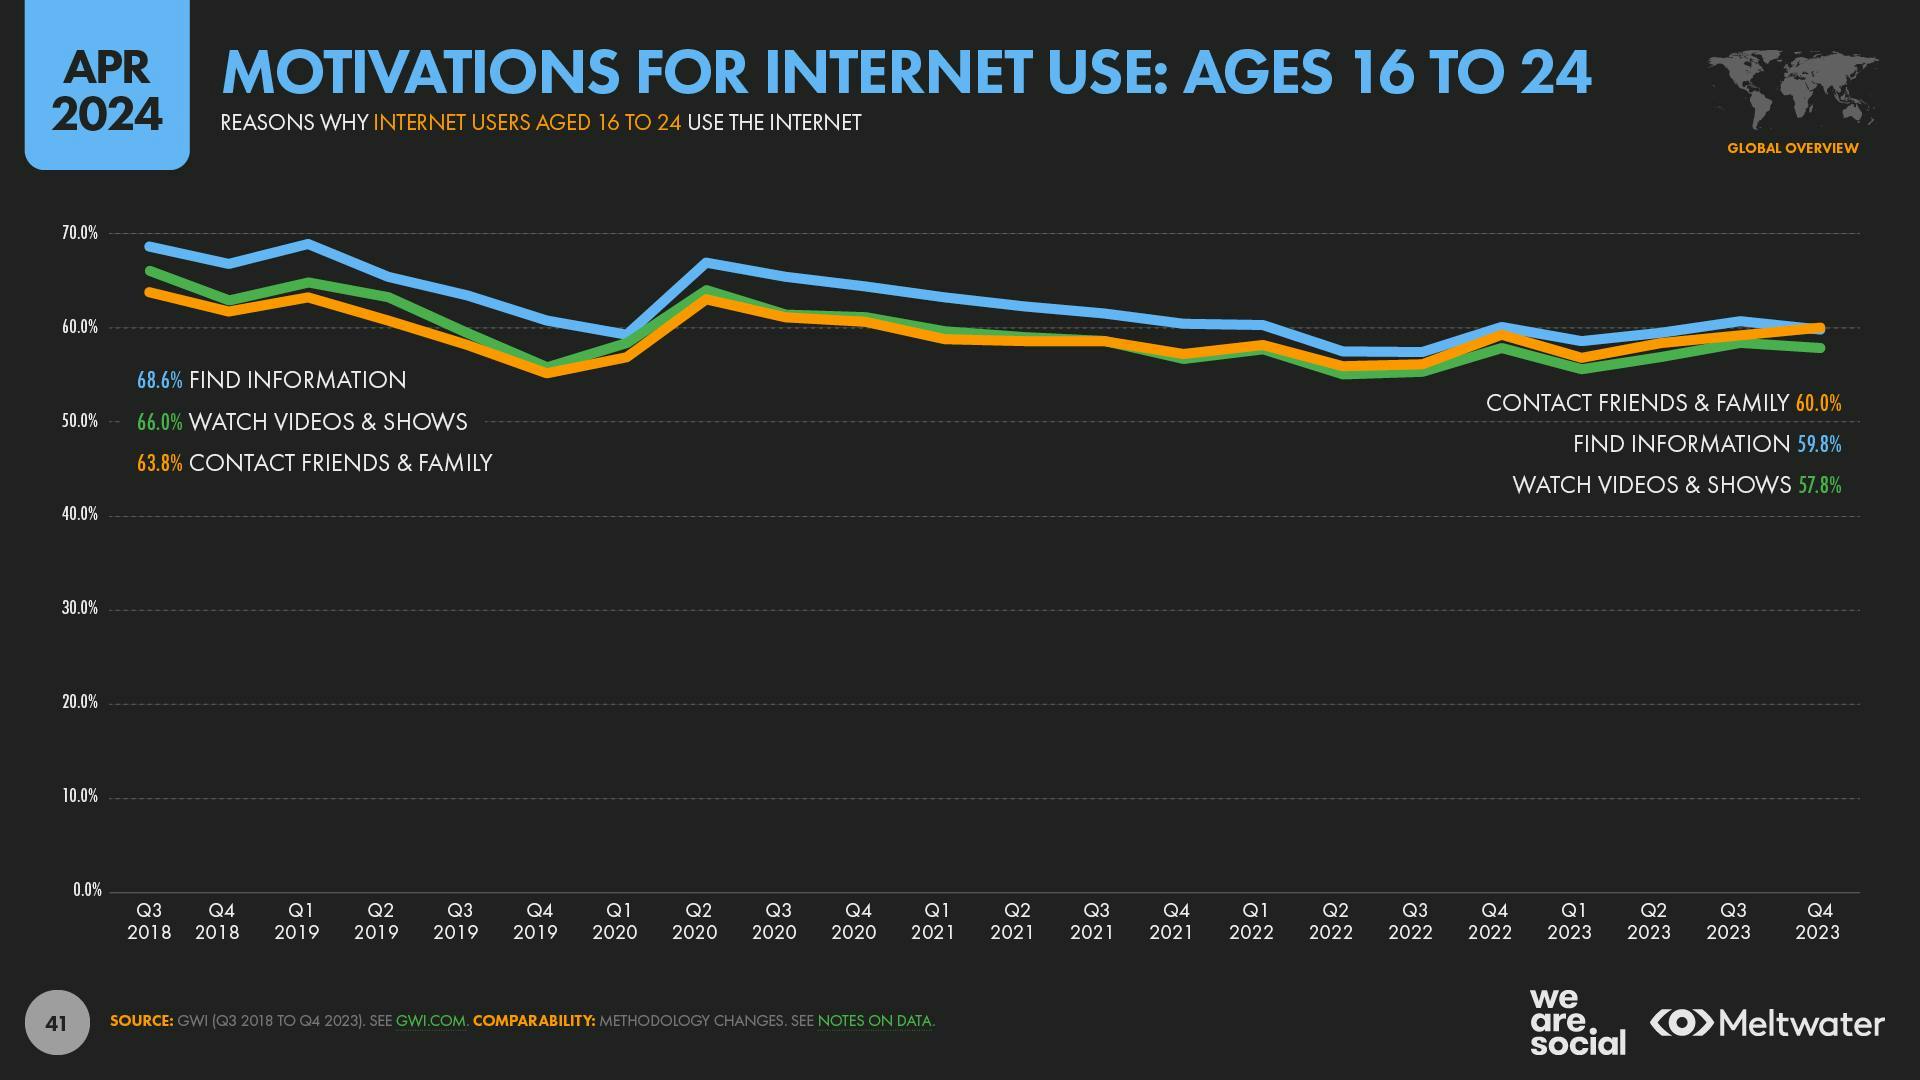 Motivations for internet use: Ages 16 to 24